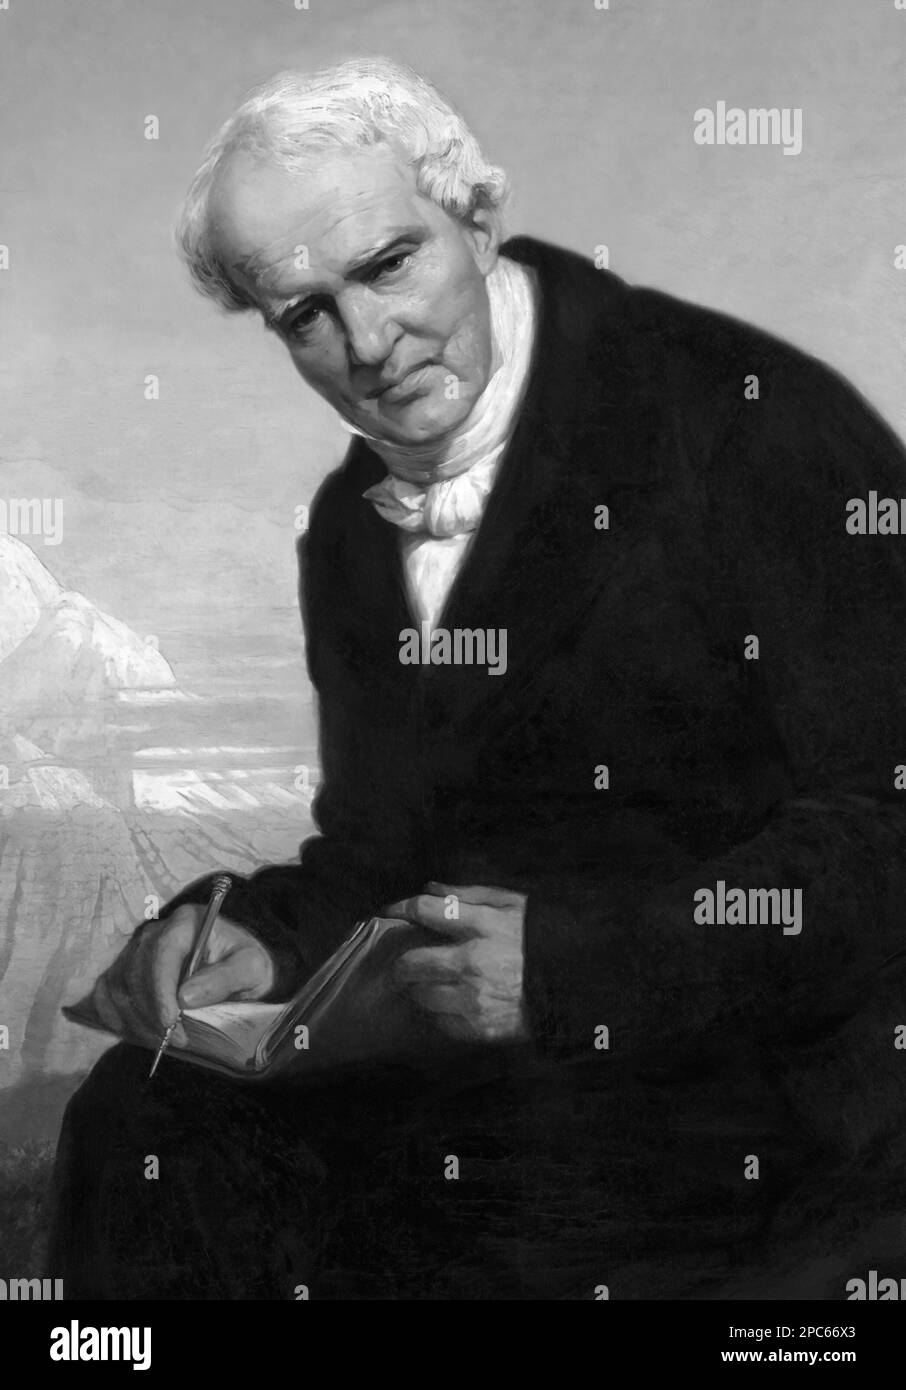 Alexander von Humboldt (1769-1859), influential German naturalist and explorer, was a significant contributor to the scientific fields of physical geography and biogeography in the early to mid 1800s. Stock Photo